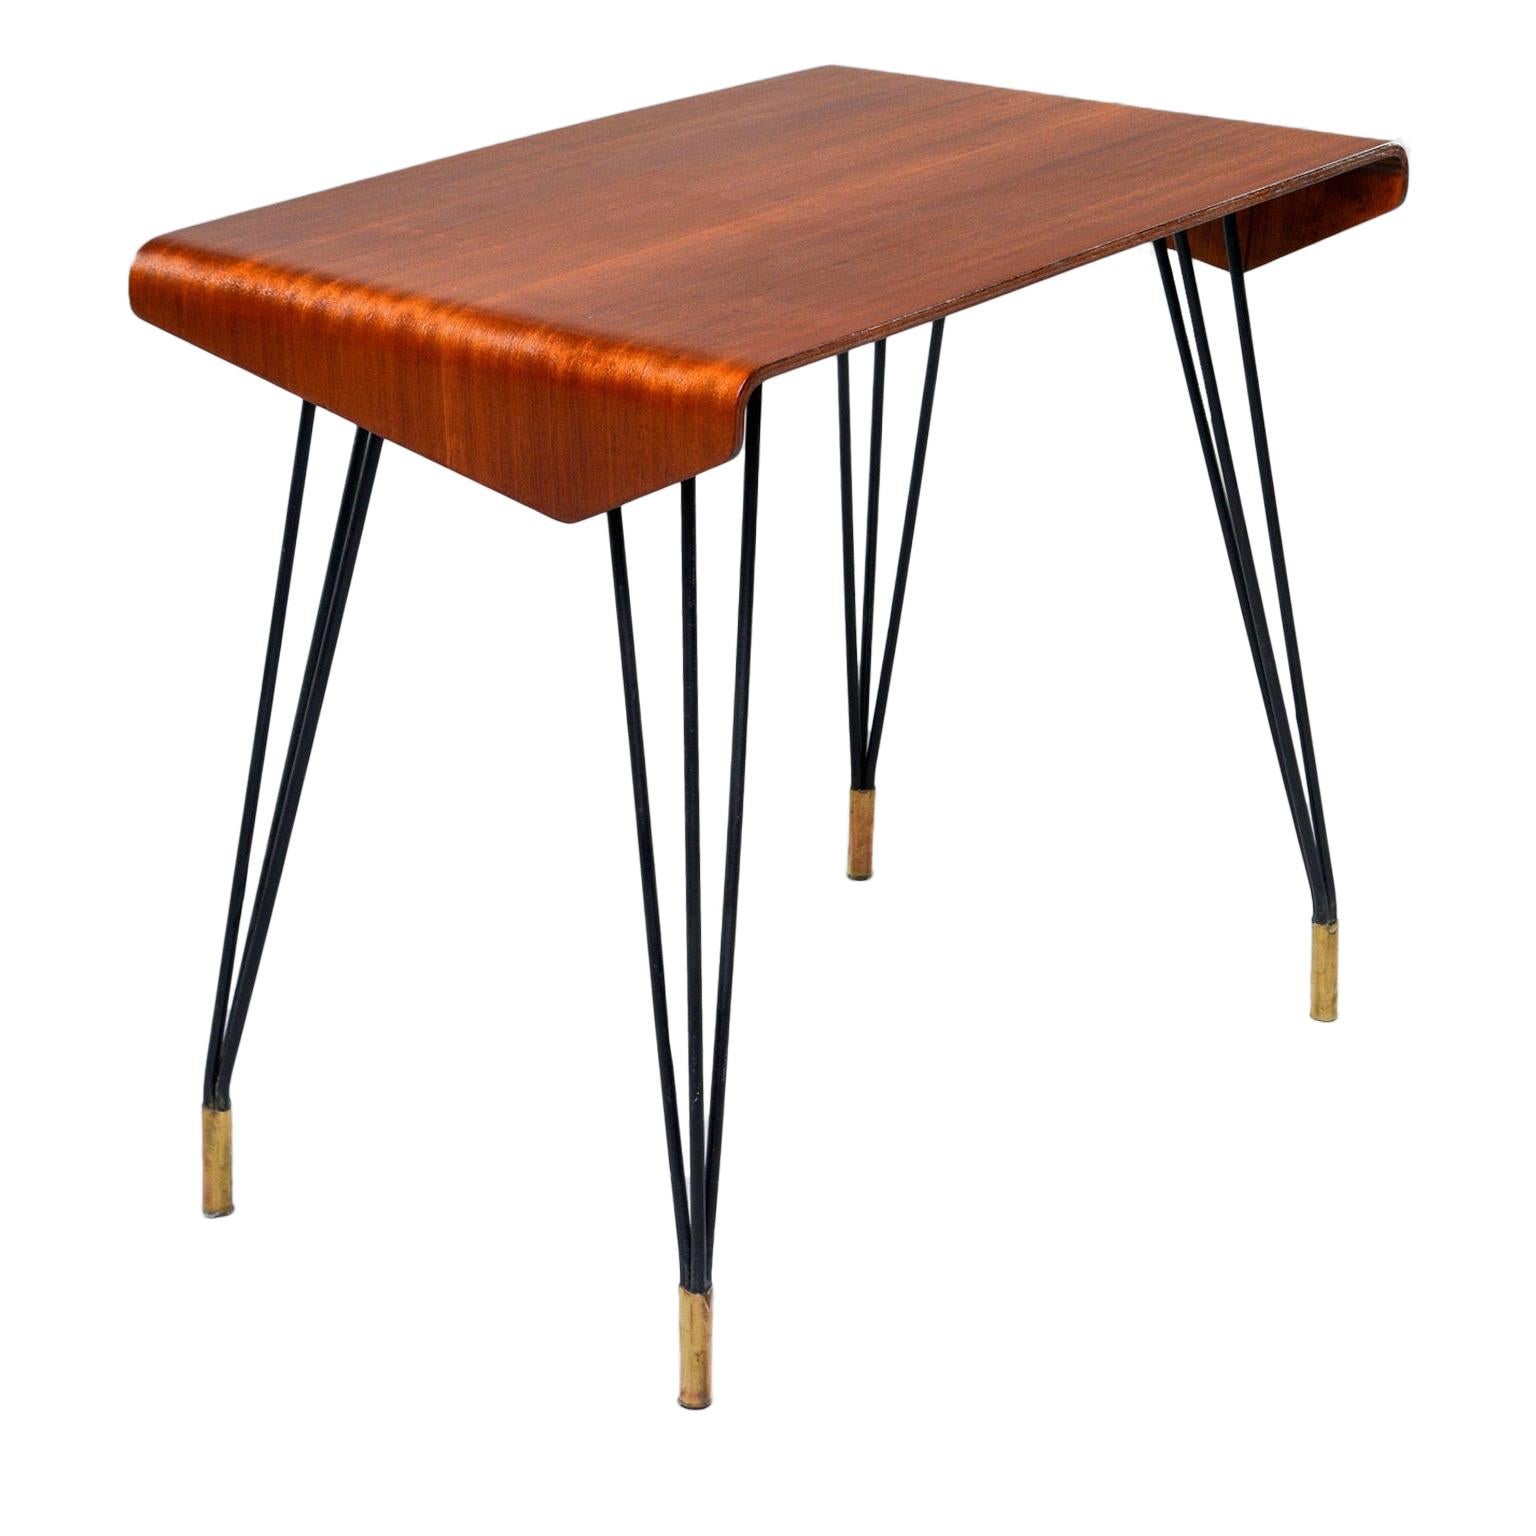 Italian Midcentury Bent Wood Table with Iron Legs and Brass Feet